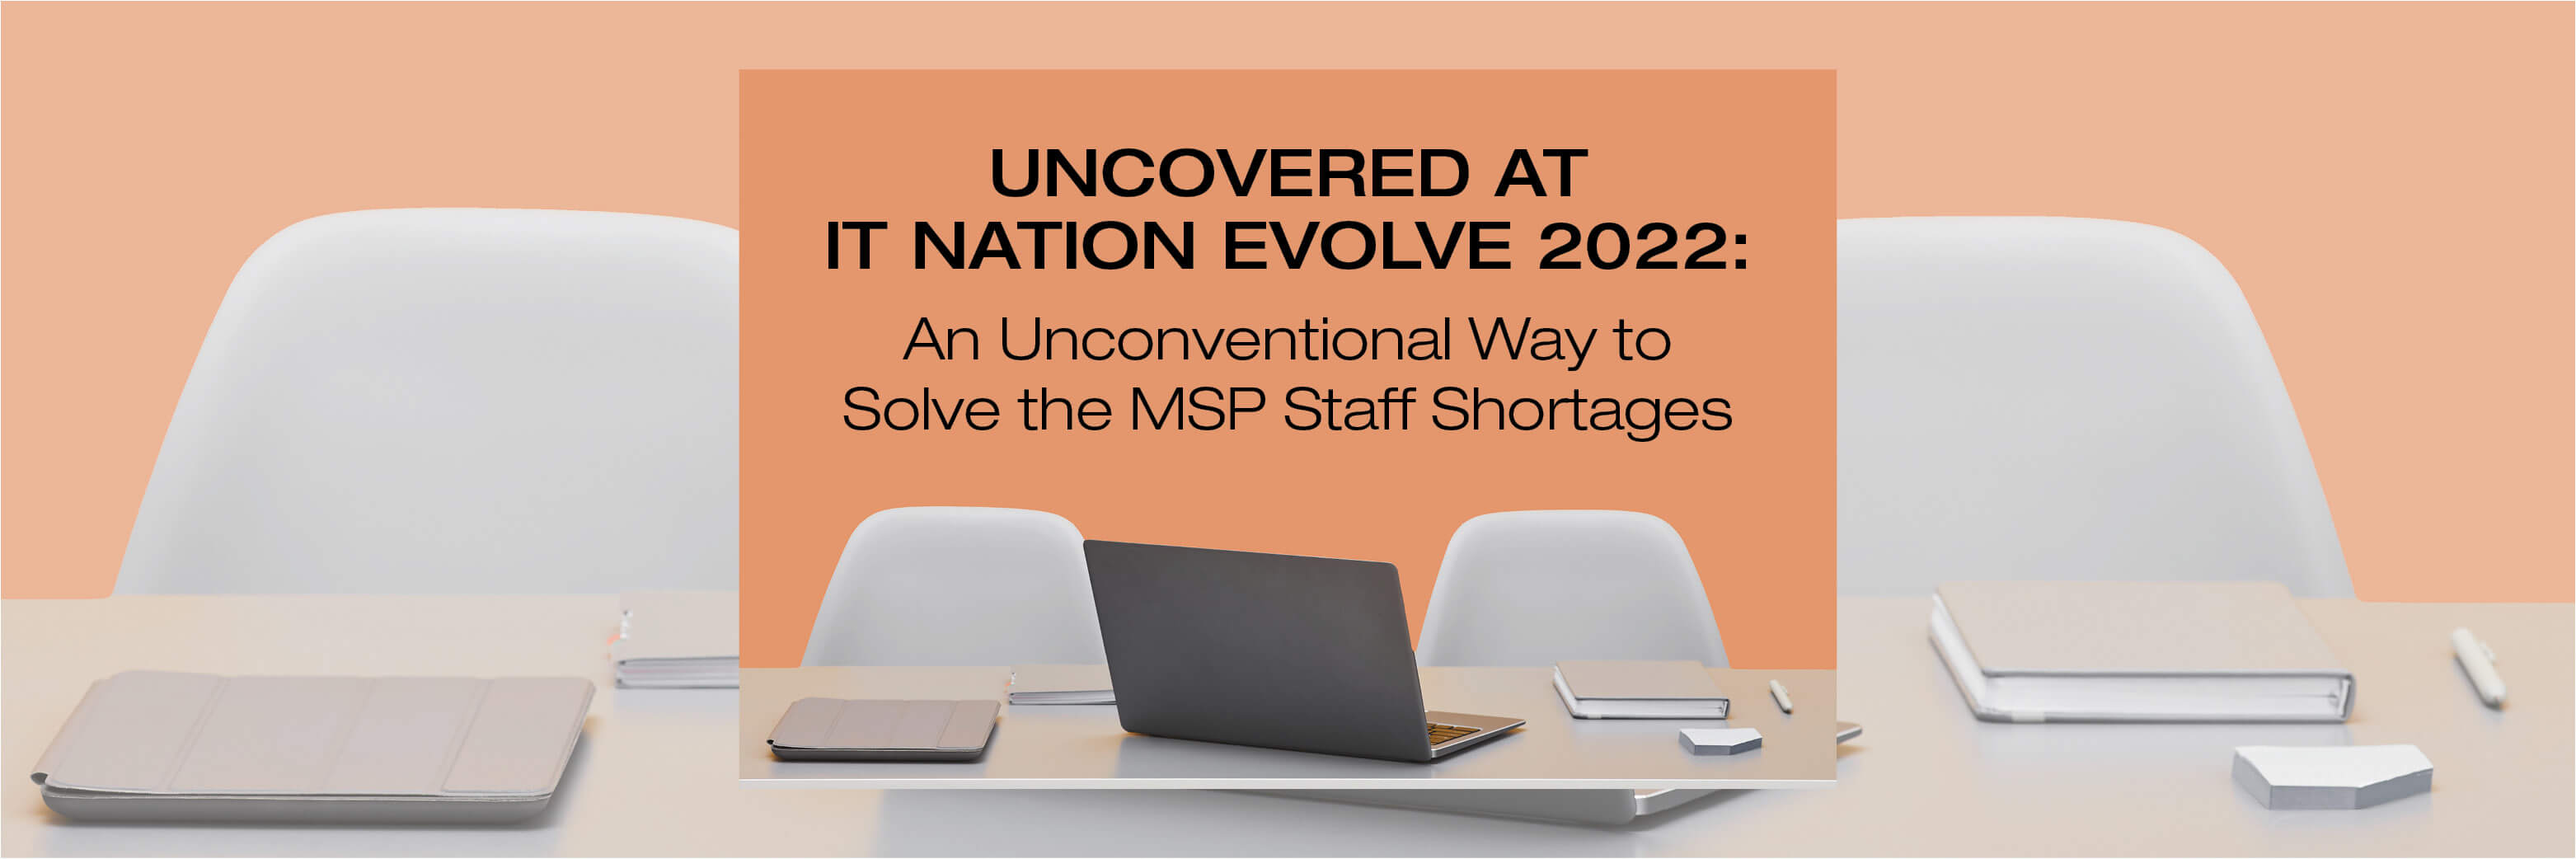 Uncovered at IT Nation Evolve 2022: An Unconventional Way to Solve the MSP Staff Shortages